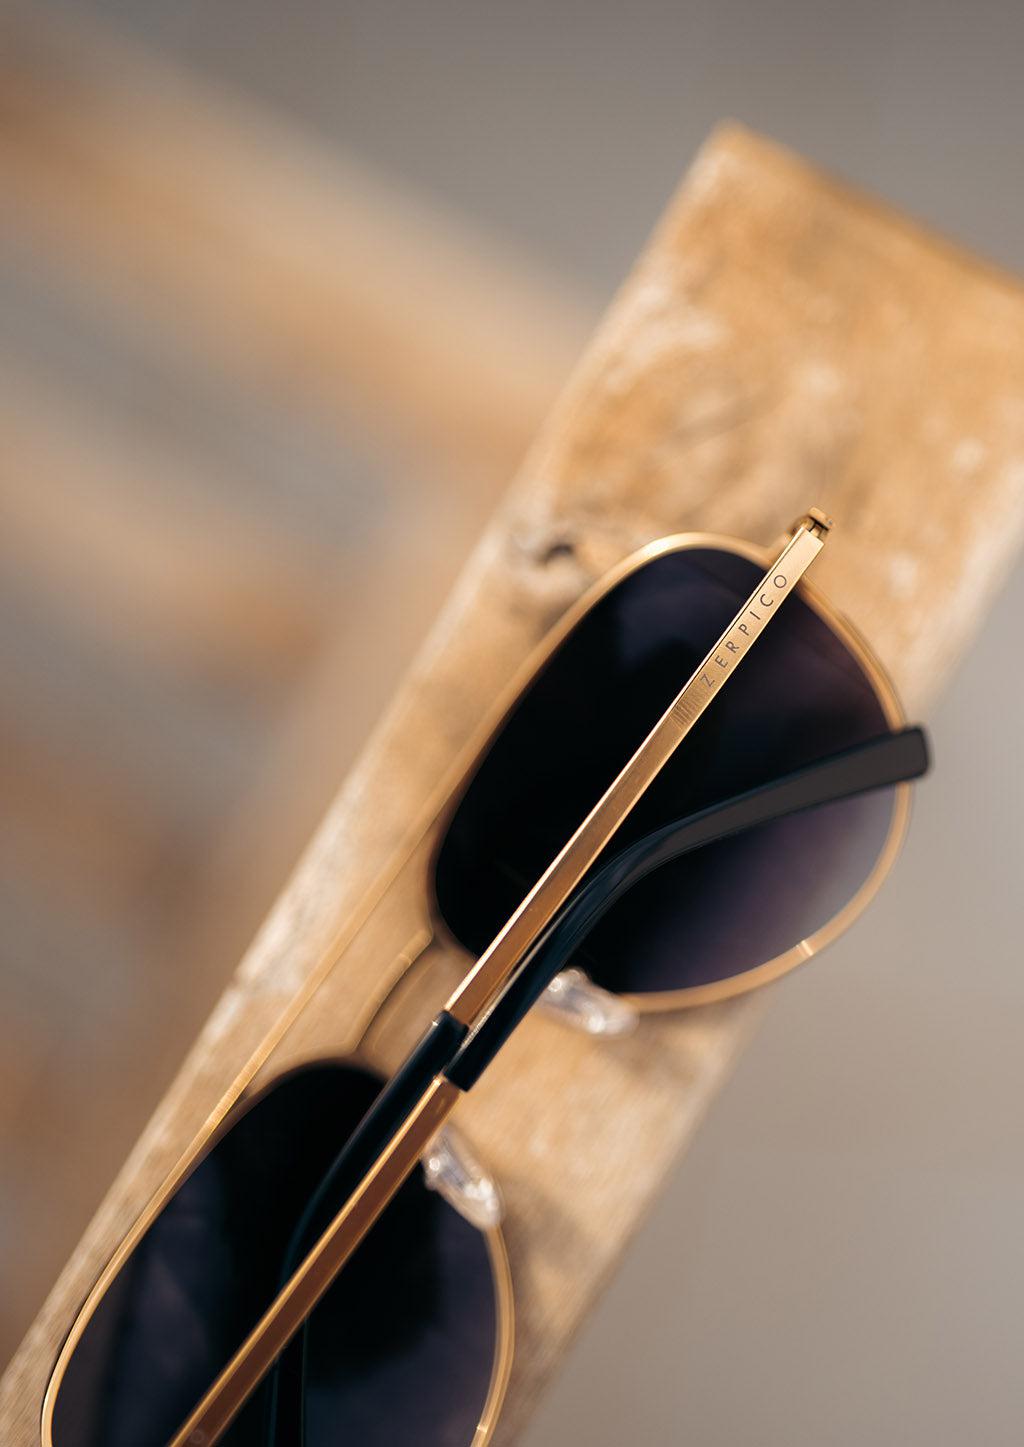 Titan - Titanium Aviator Sunglasses V2 - 24K Gold Plated with real gold. Photo taken outside in Italy.